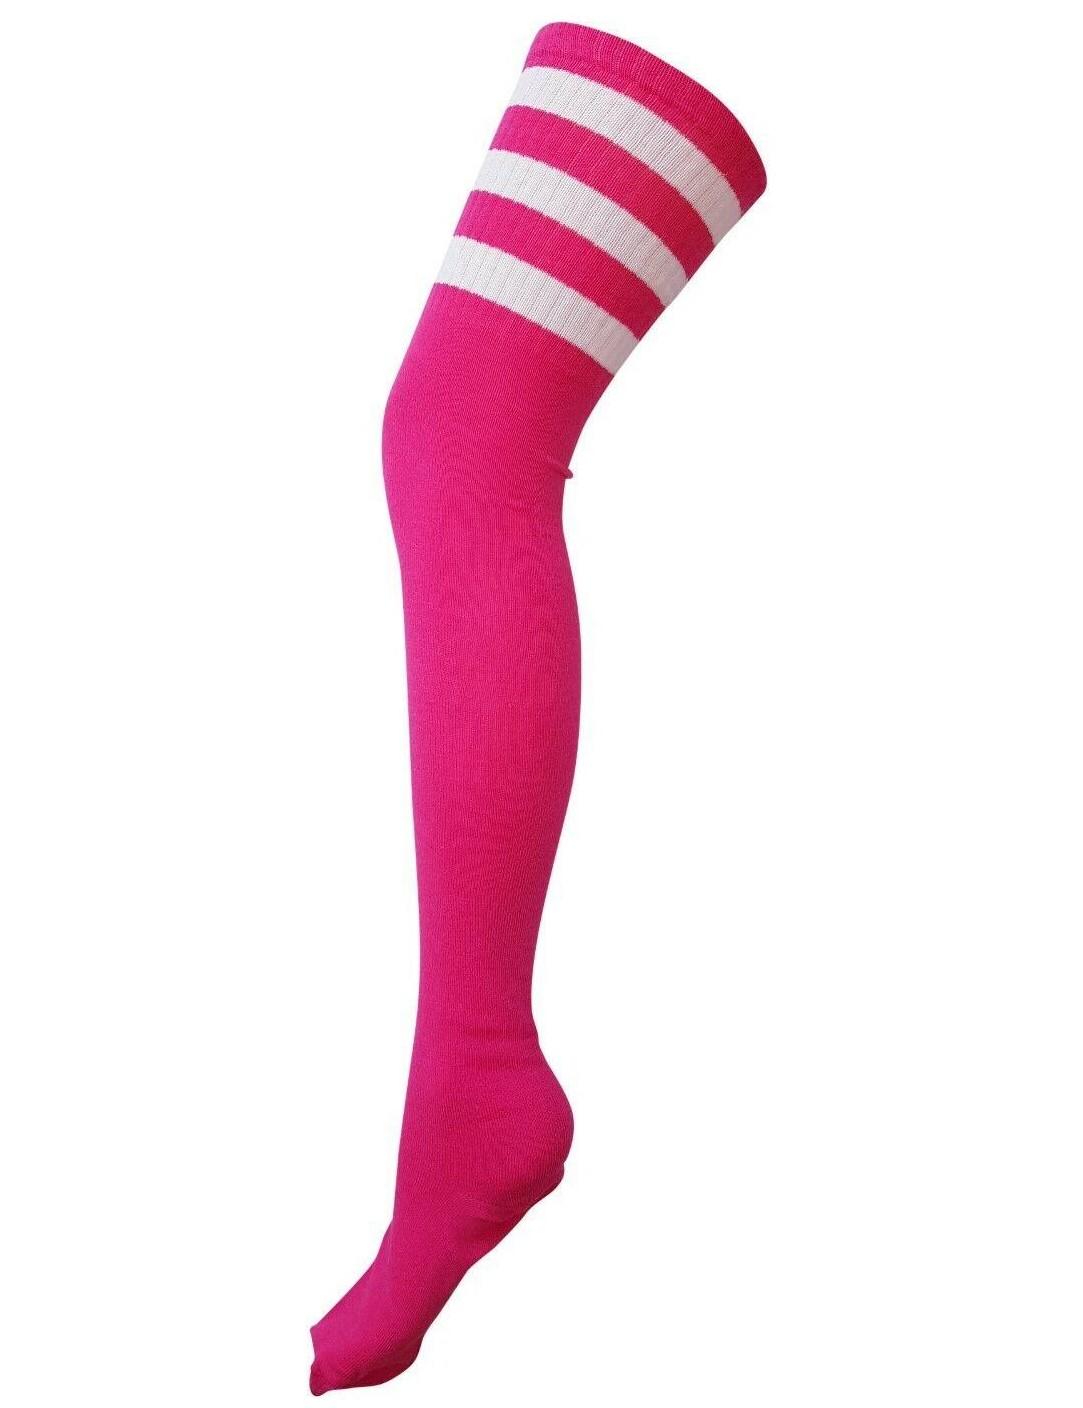 Referee Style Thigh High Over The Knee Striped Socks - Kiss Tights